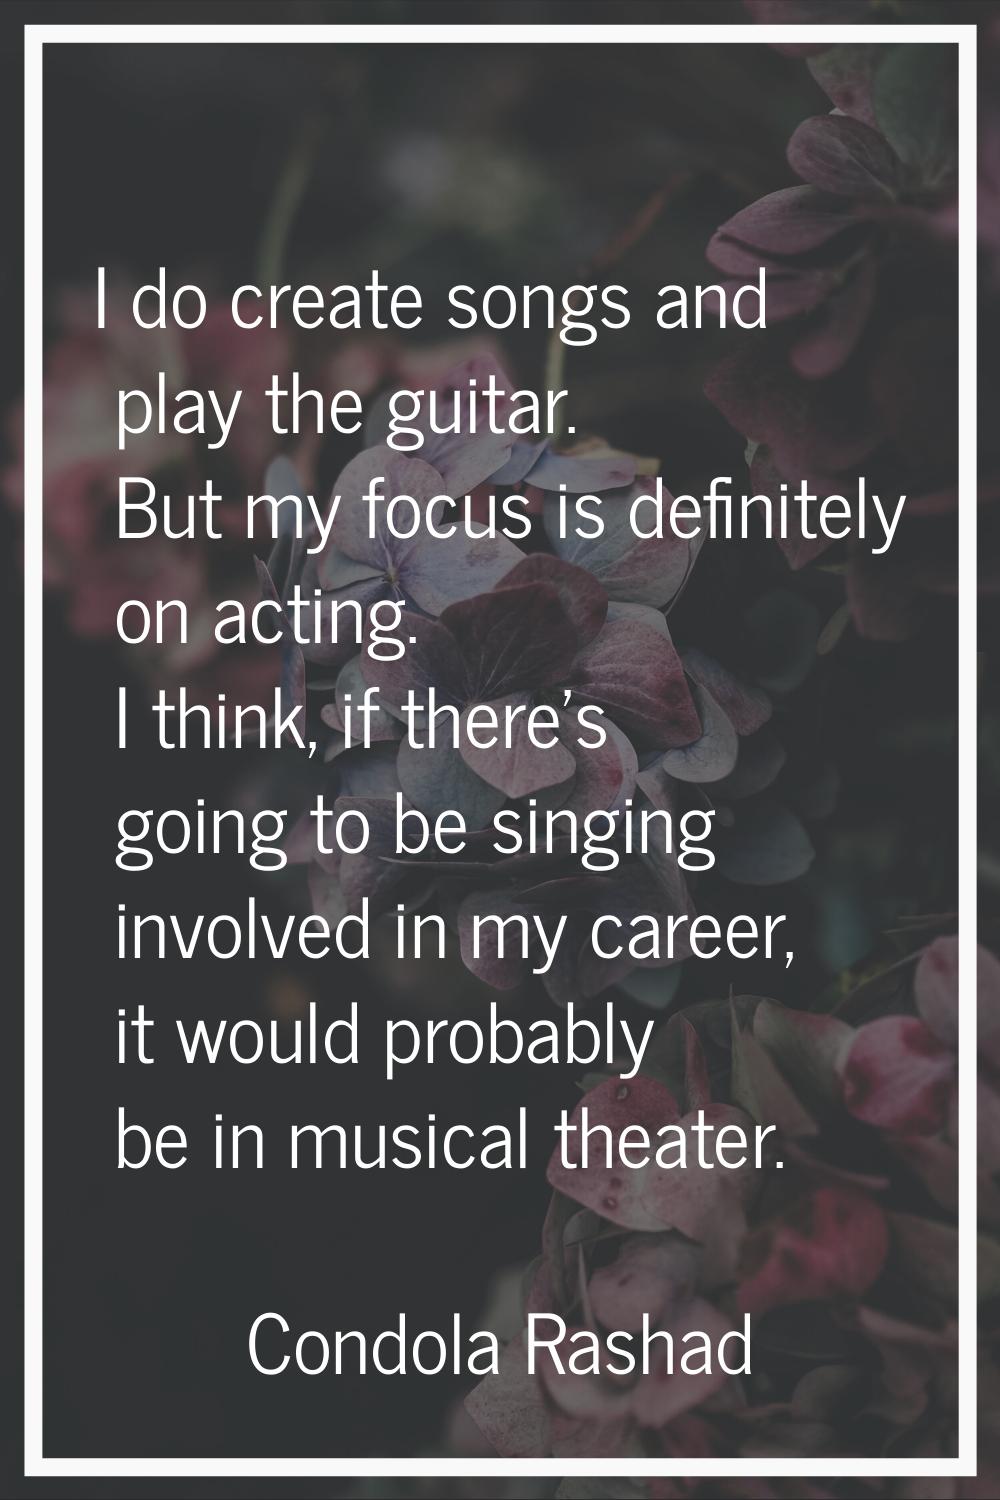 I do create songs and play the guitar. But my focus is definitely on acting. I think, if there's go